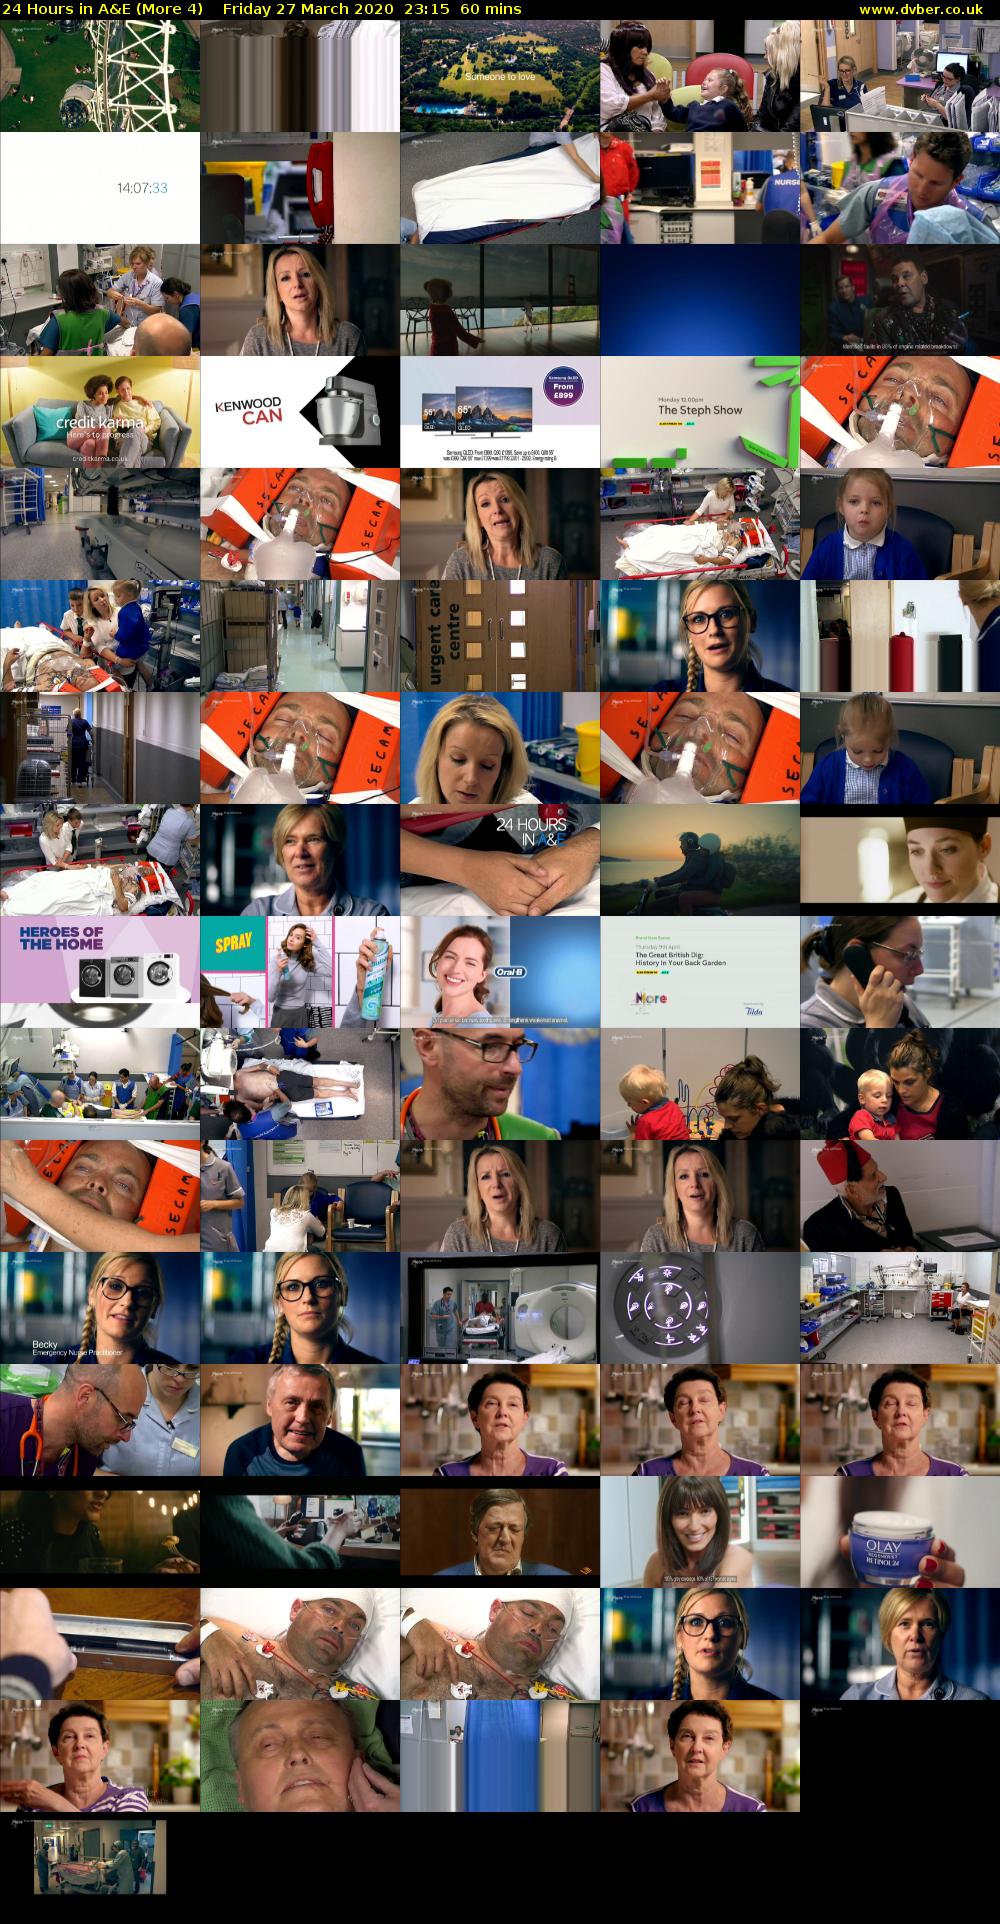 24 Hours in A&E (More 4) Friday 27 March 2020 23:15 - 00:15